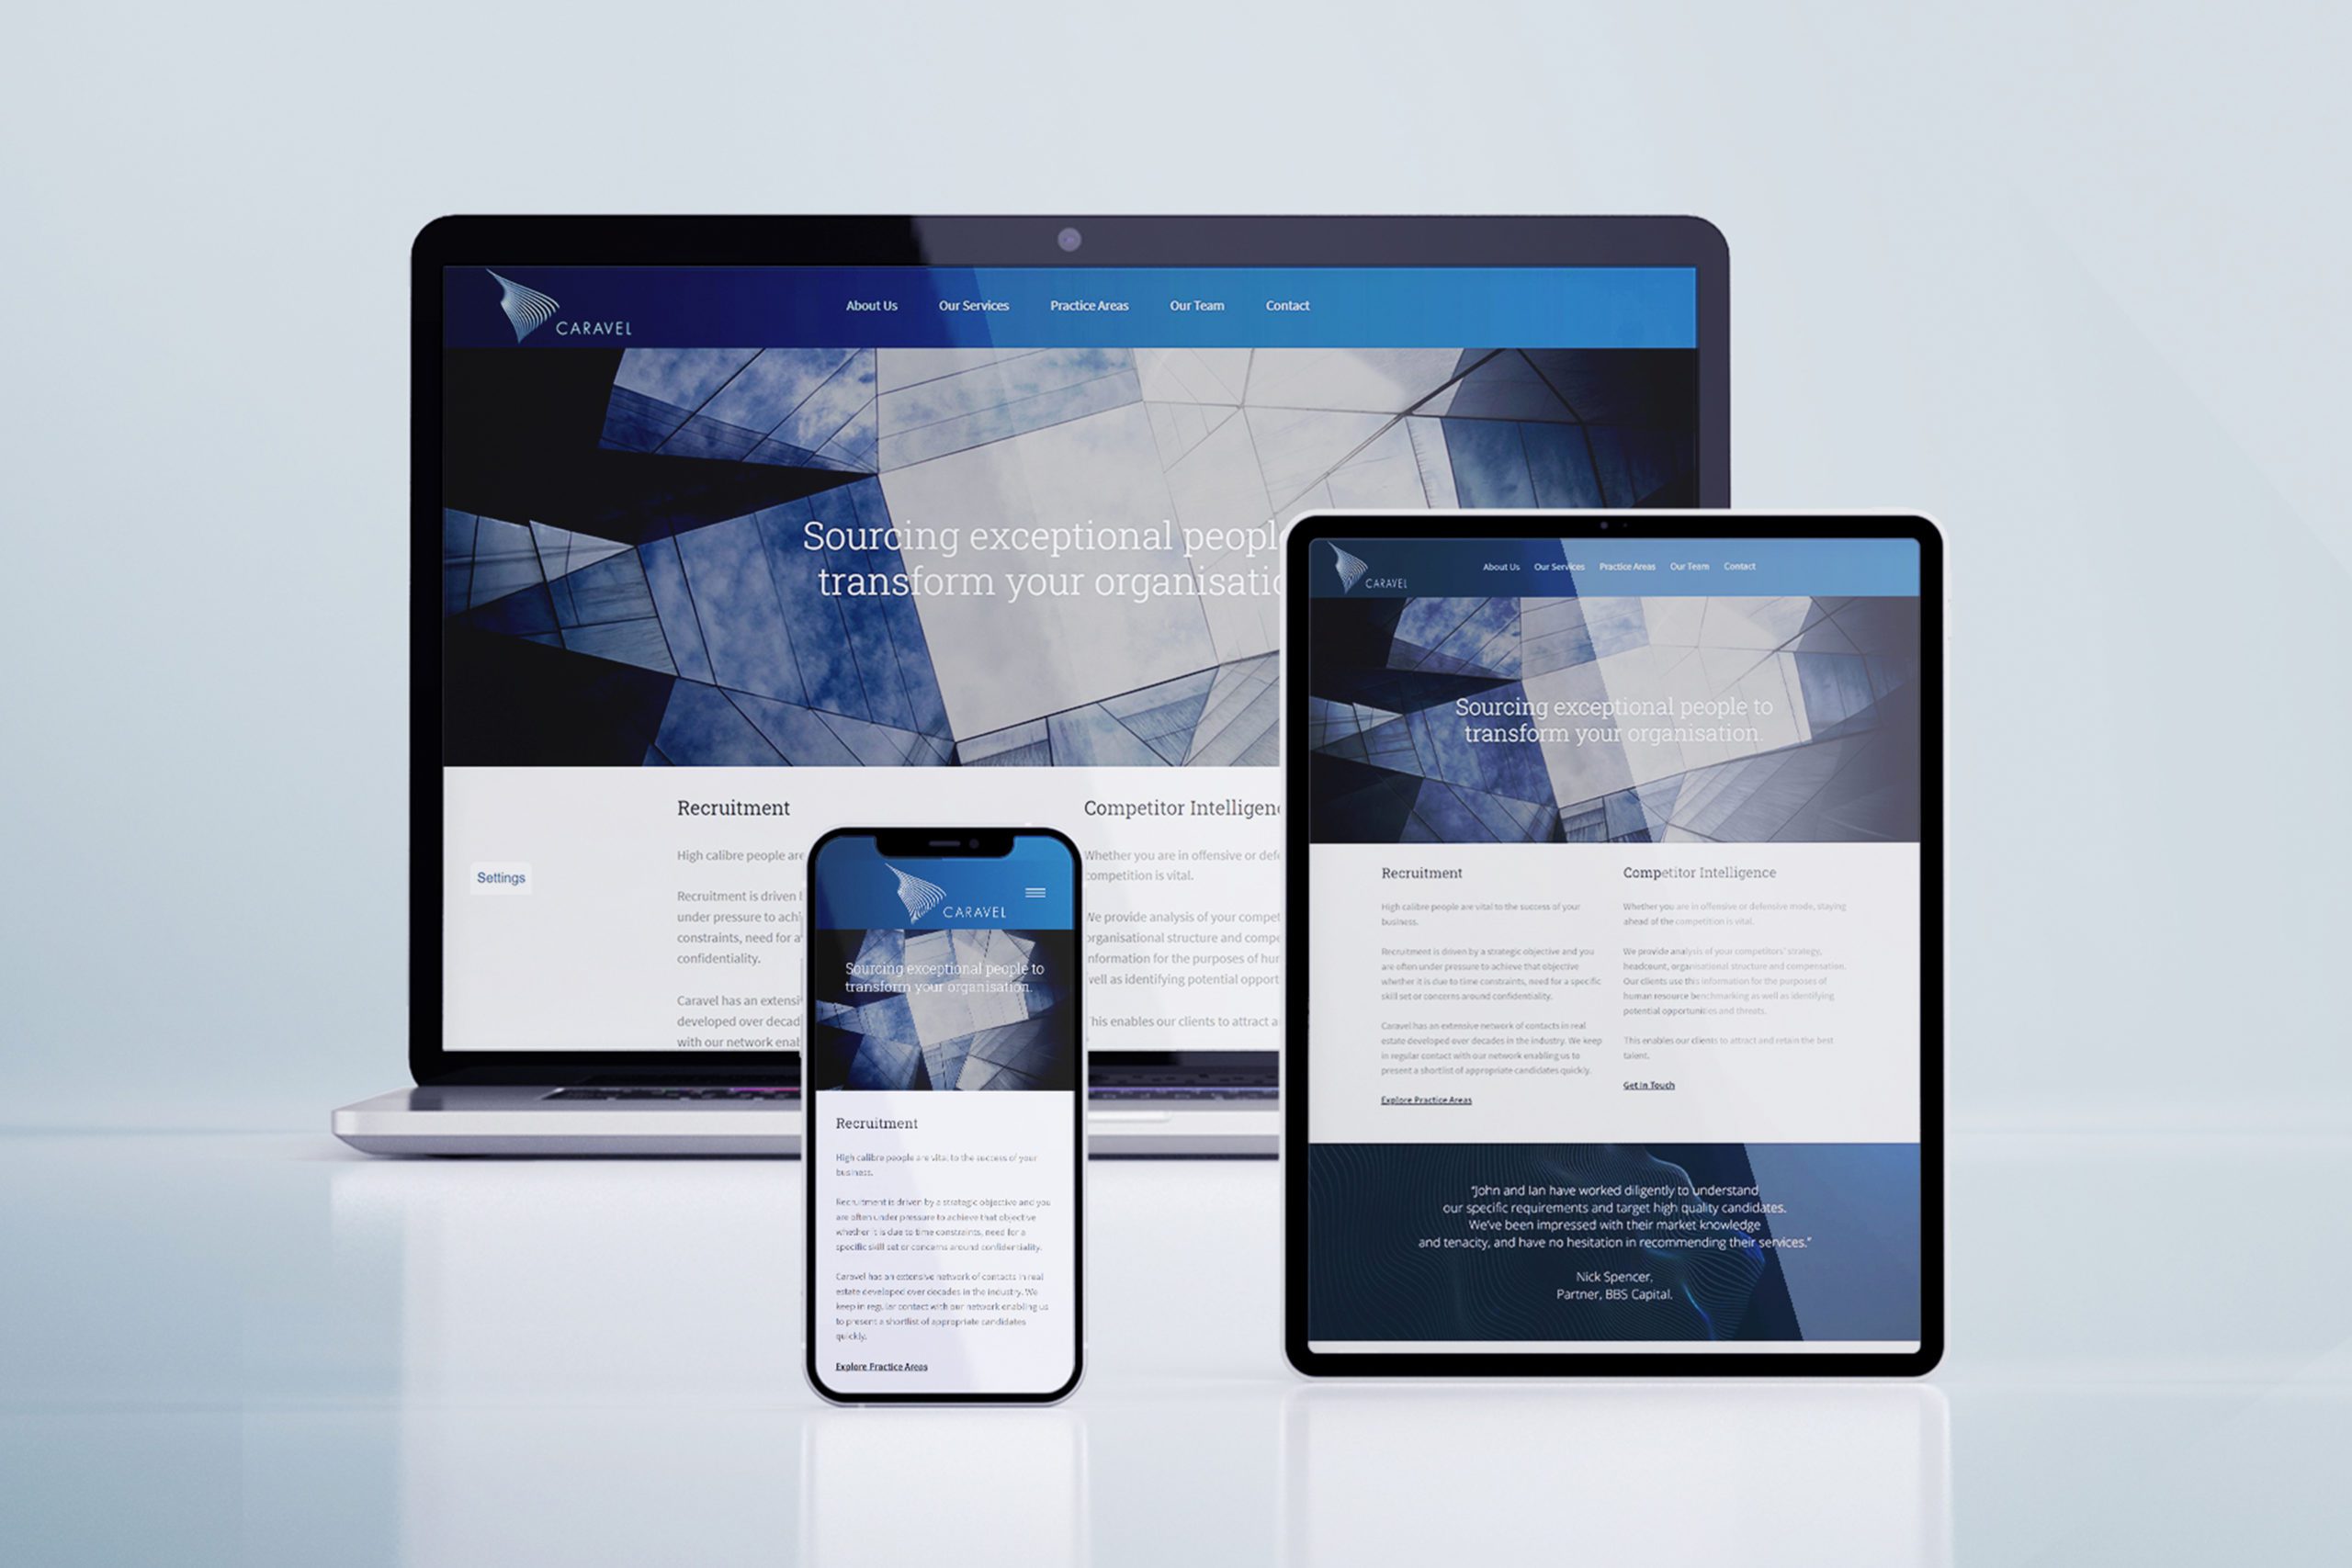 Caravel website shown on various responsive devices on ice blue background